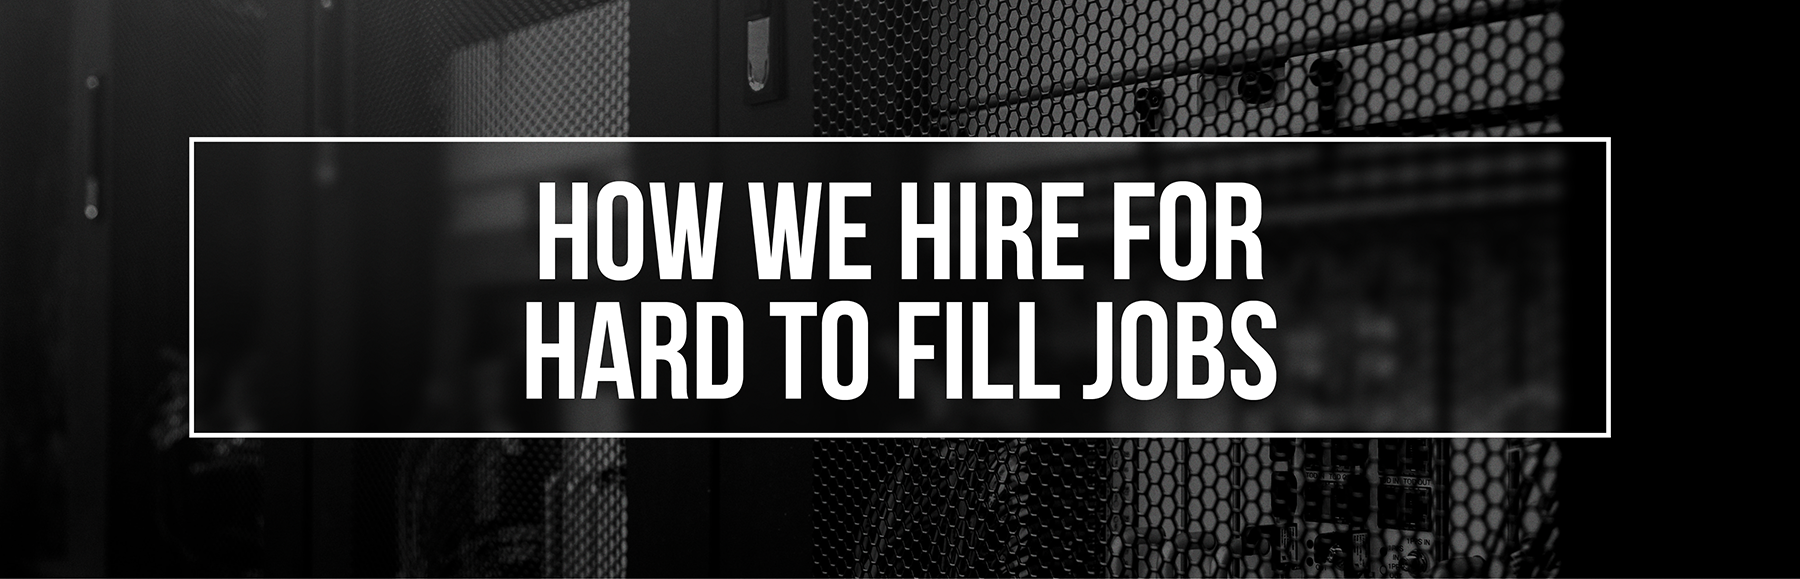 how-we-hire-hard-to-fill